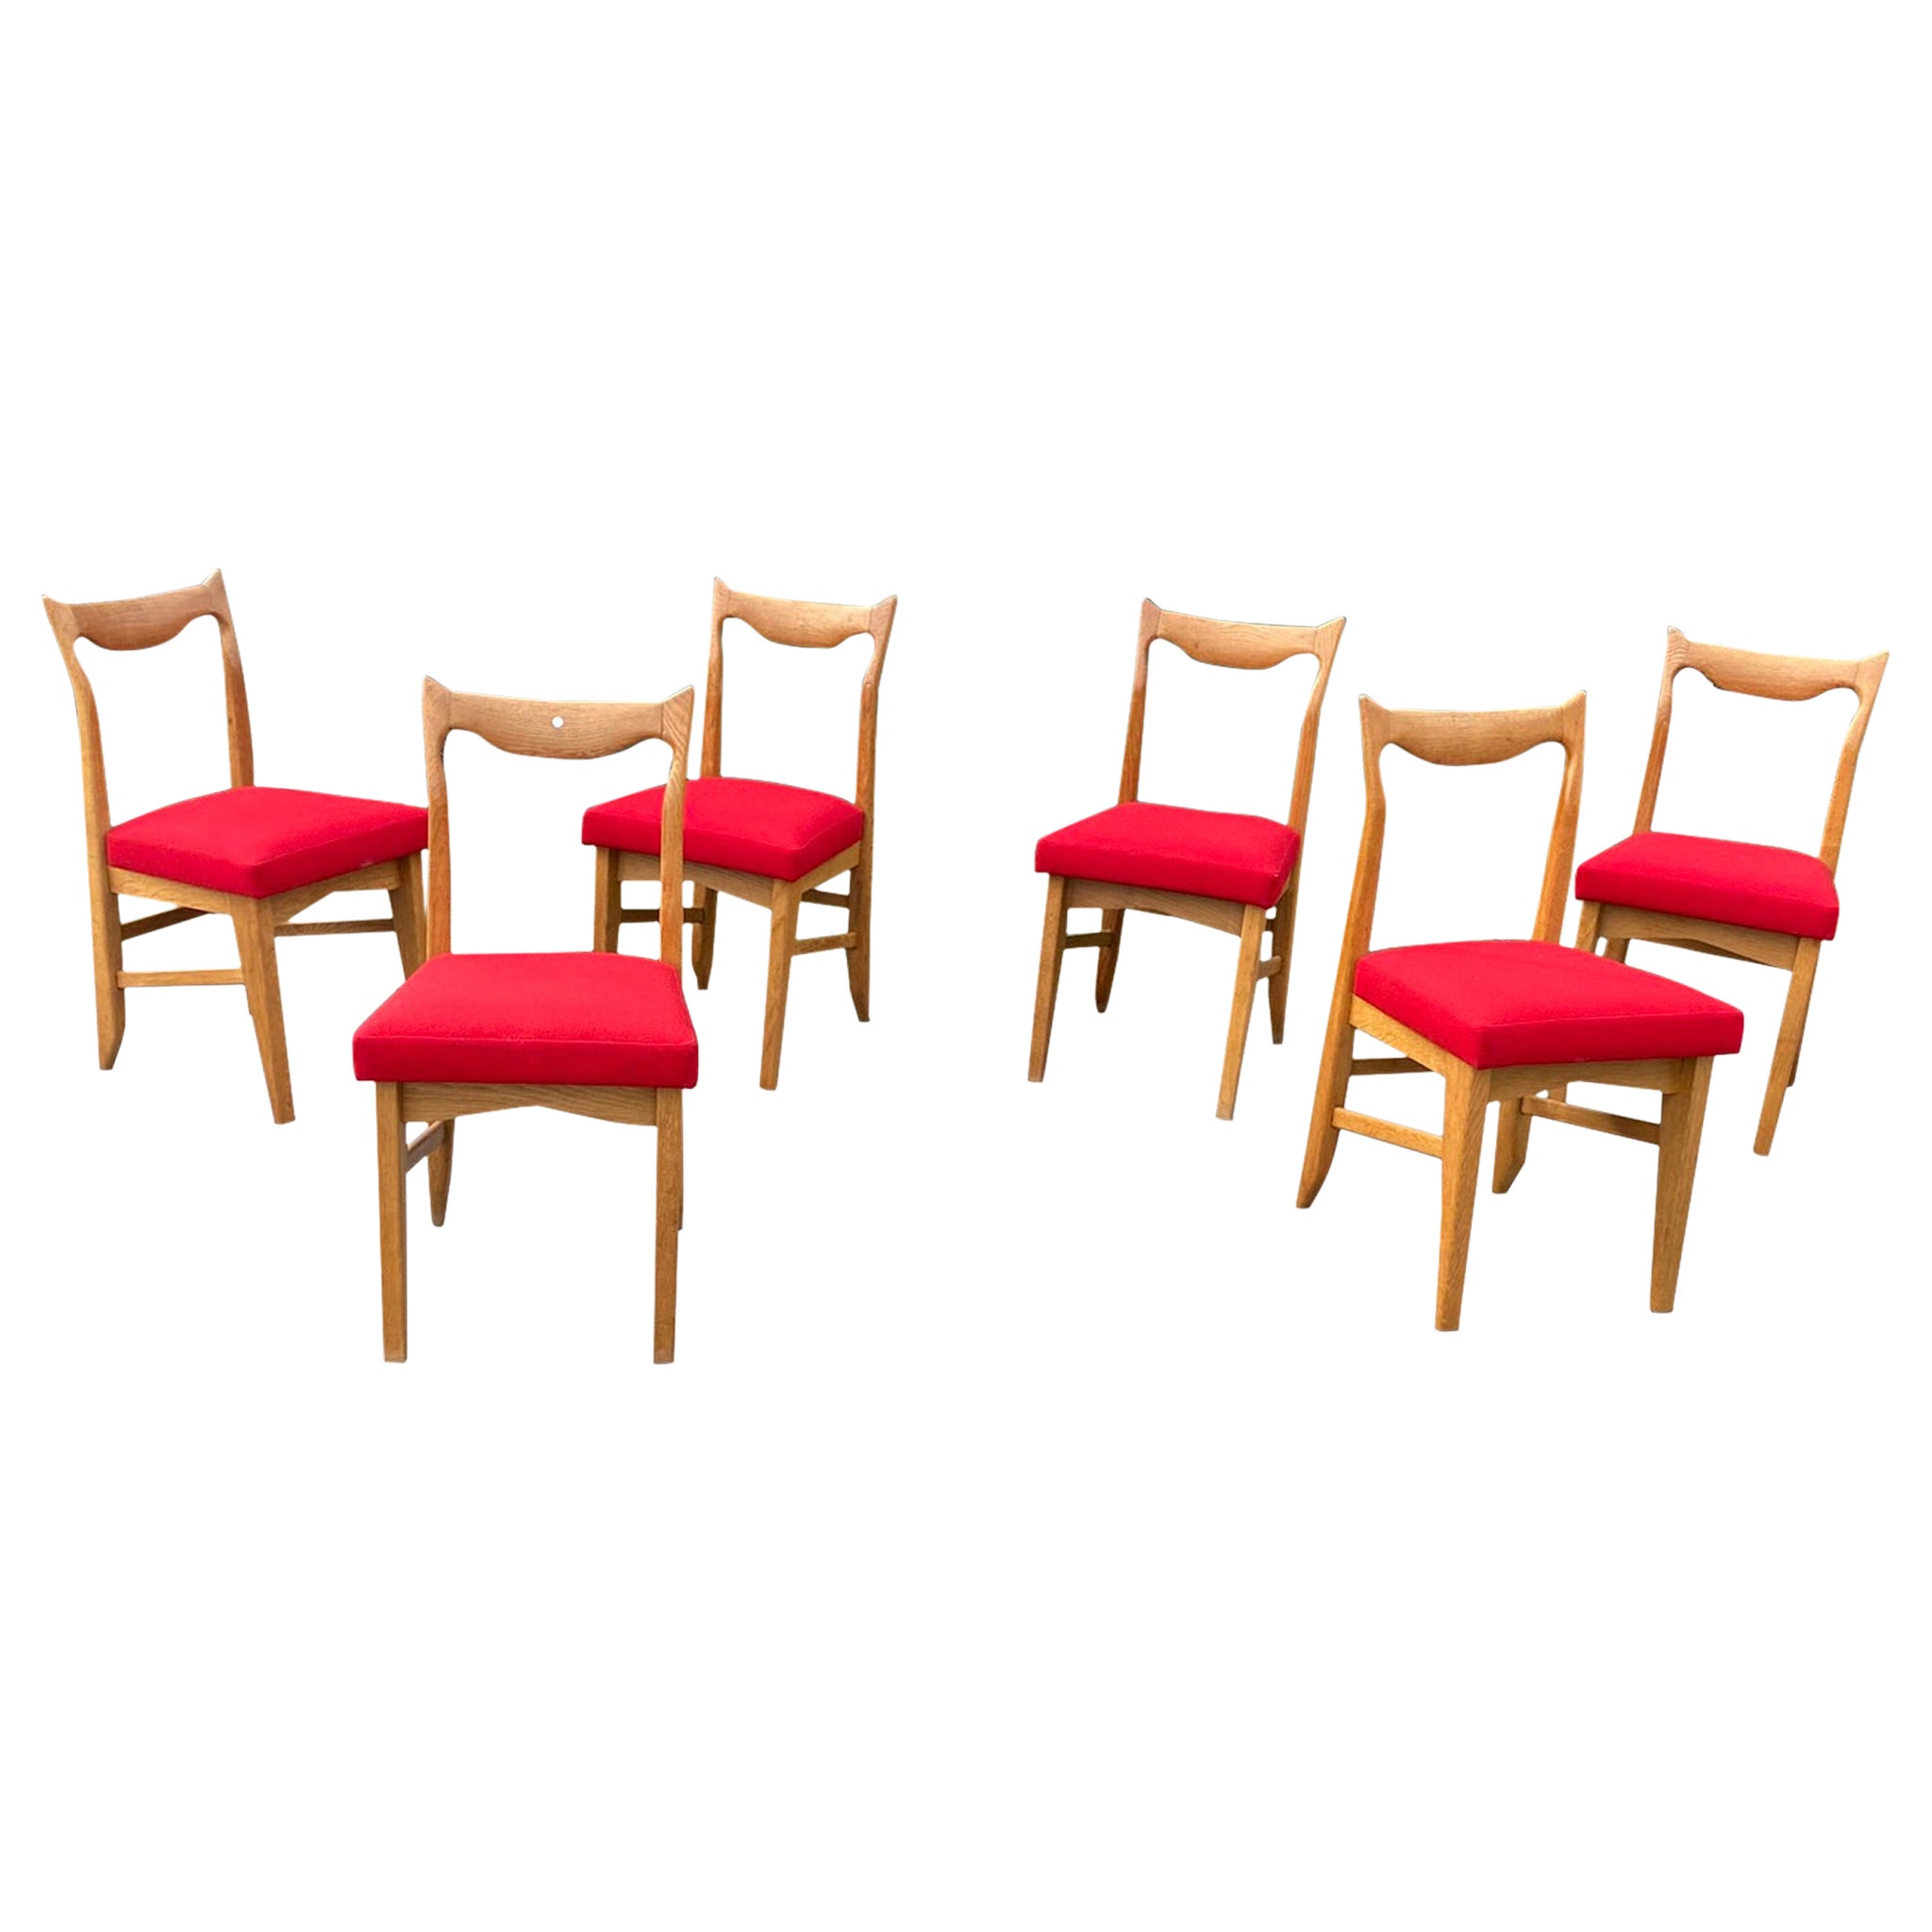 Guillerme and Chambron, Suite of 6 Chairs Model "Marie-Claire", circa 1970 For Sale